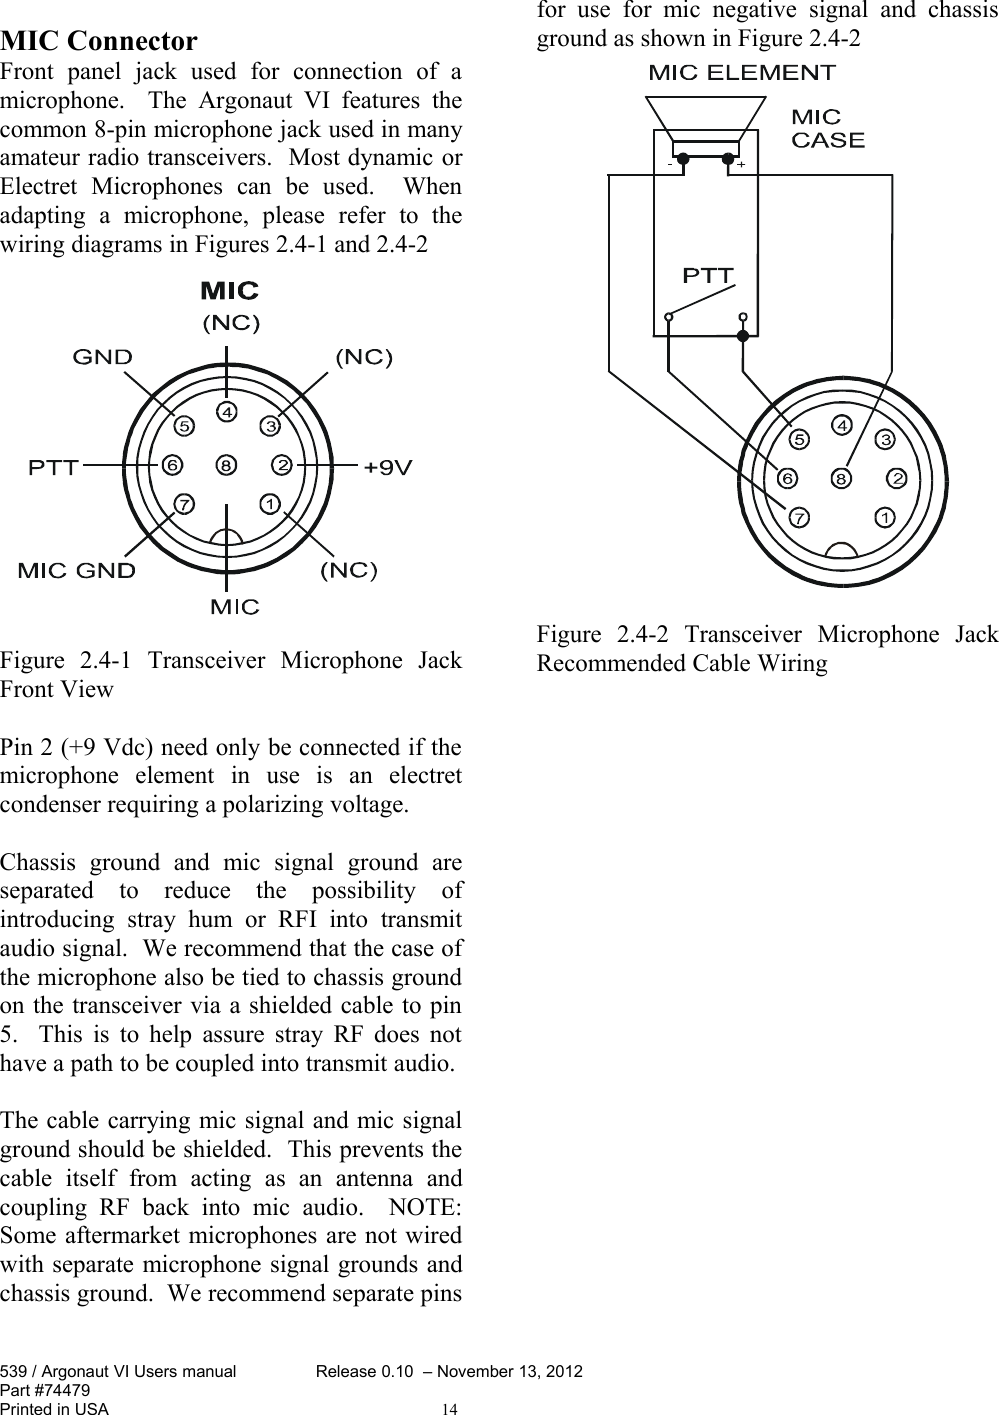 MIC Connector Front   panel   jack   used   for   connection   of   a microphone.    The   Argonaut  VI  features   the common 8-pin microphone jack used in many amateur radio transceivers.  Most dynamic or Electret   Microphones   can   be   used.     When adapting   a   microphone,   please   refer   to   the wiring diagrams in Figures 2.4-1 and 2.4-2 Figure   2.4-1   Transceiver   Microphone   Jack Front ViewPin 2 (+9 Vdc) need only be connected if the microphone   element   in   use   is   an   electret condenser requiring a polarizing voltage.  Chassis   ground   and   mic   signal   ground   are separated   to   reduce   the   possibility   of introducing   stray   hum   or   RFI   into   transmit audio signal.  We recommend that the case of the microphone also be tied to chassis ground on the transceiver via a shielded cable to pin 5.   This is to help assure stray RF does not have a path to be coupled into transmit audio.The cable carrying mic signal and mic signal ground should be shielded.  This prevents the cable   itself   from   acting   as   an   antenna   and coupling   RF   back  into   mic   audio.     NOTE: Some aftermarket microphones are not wired with separate microphone signal grounds and chassis ground.  We recommend separate pins for use   for   mic   negative   signal  and chassis ground as shown in Figure 2.4-2Figure   2.4-2   Transceiver   Microphone   Jack Recommended Cable Wiring539 / Argonaut VI Users manual Release 0.10  – November 13, 2012Part #74479Printed in USA 14